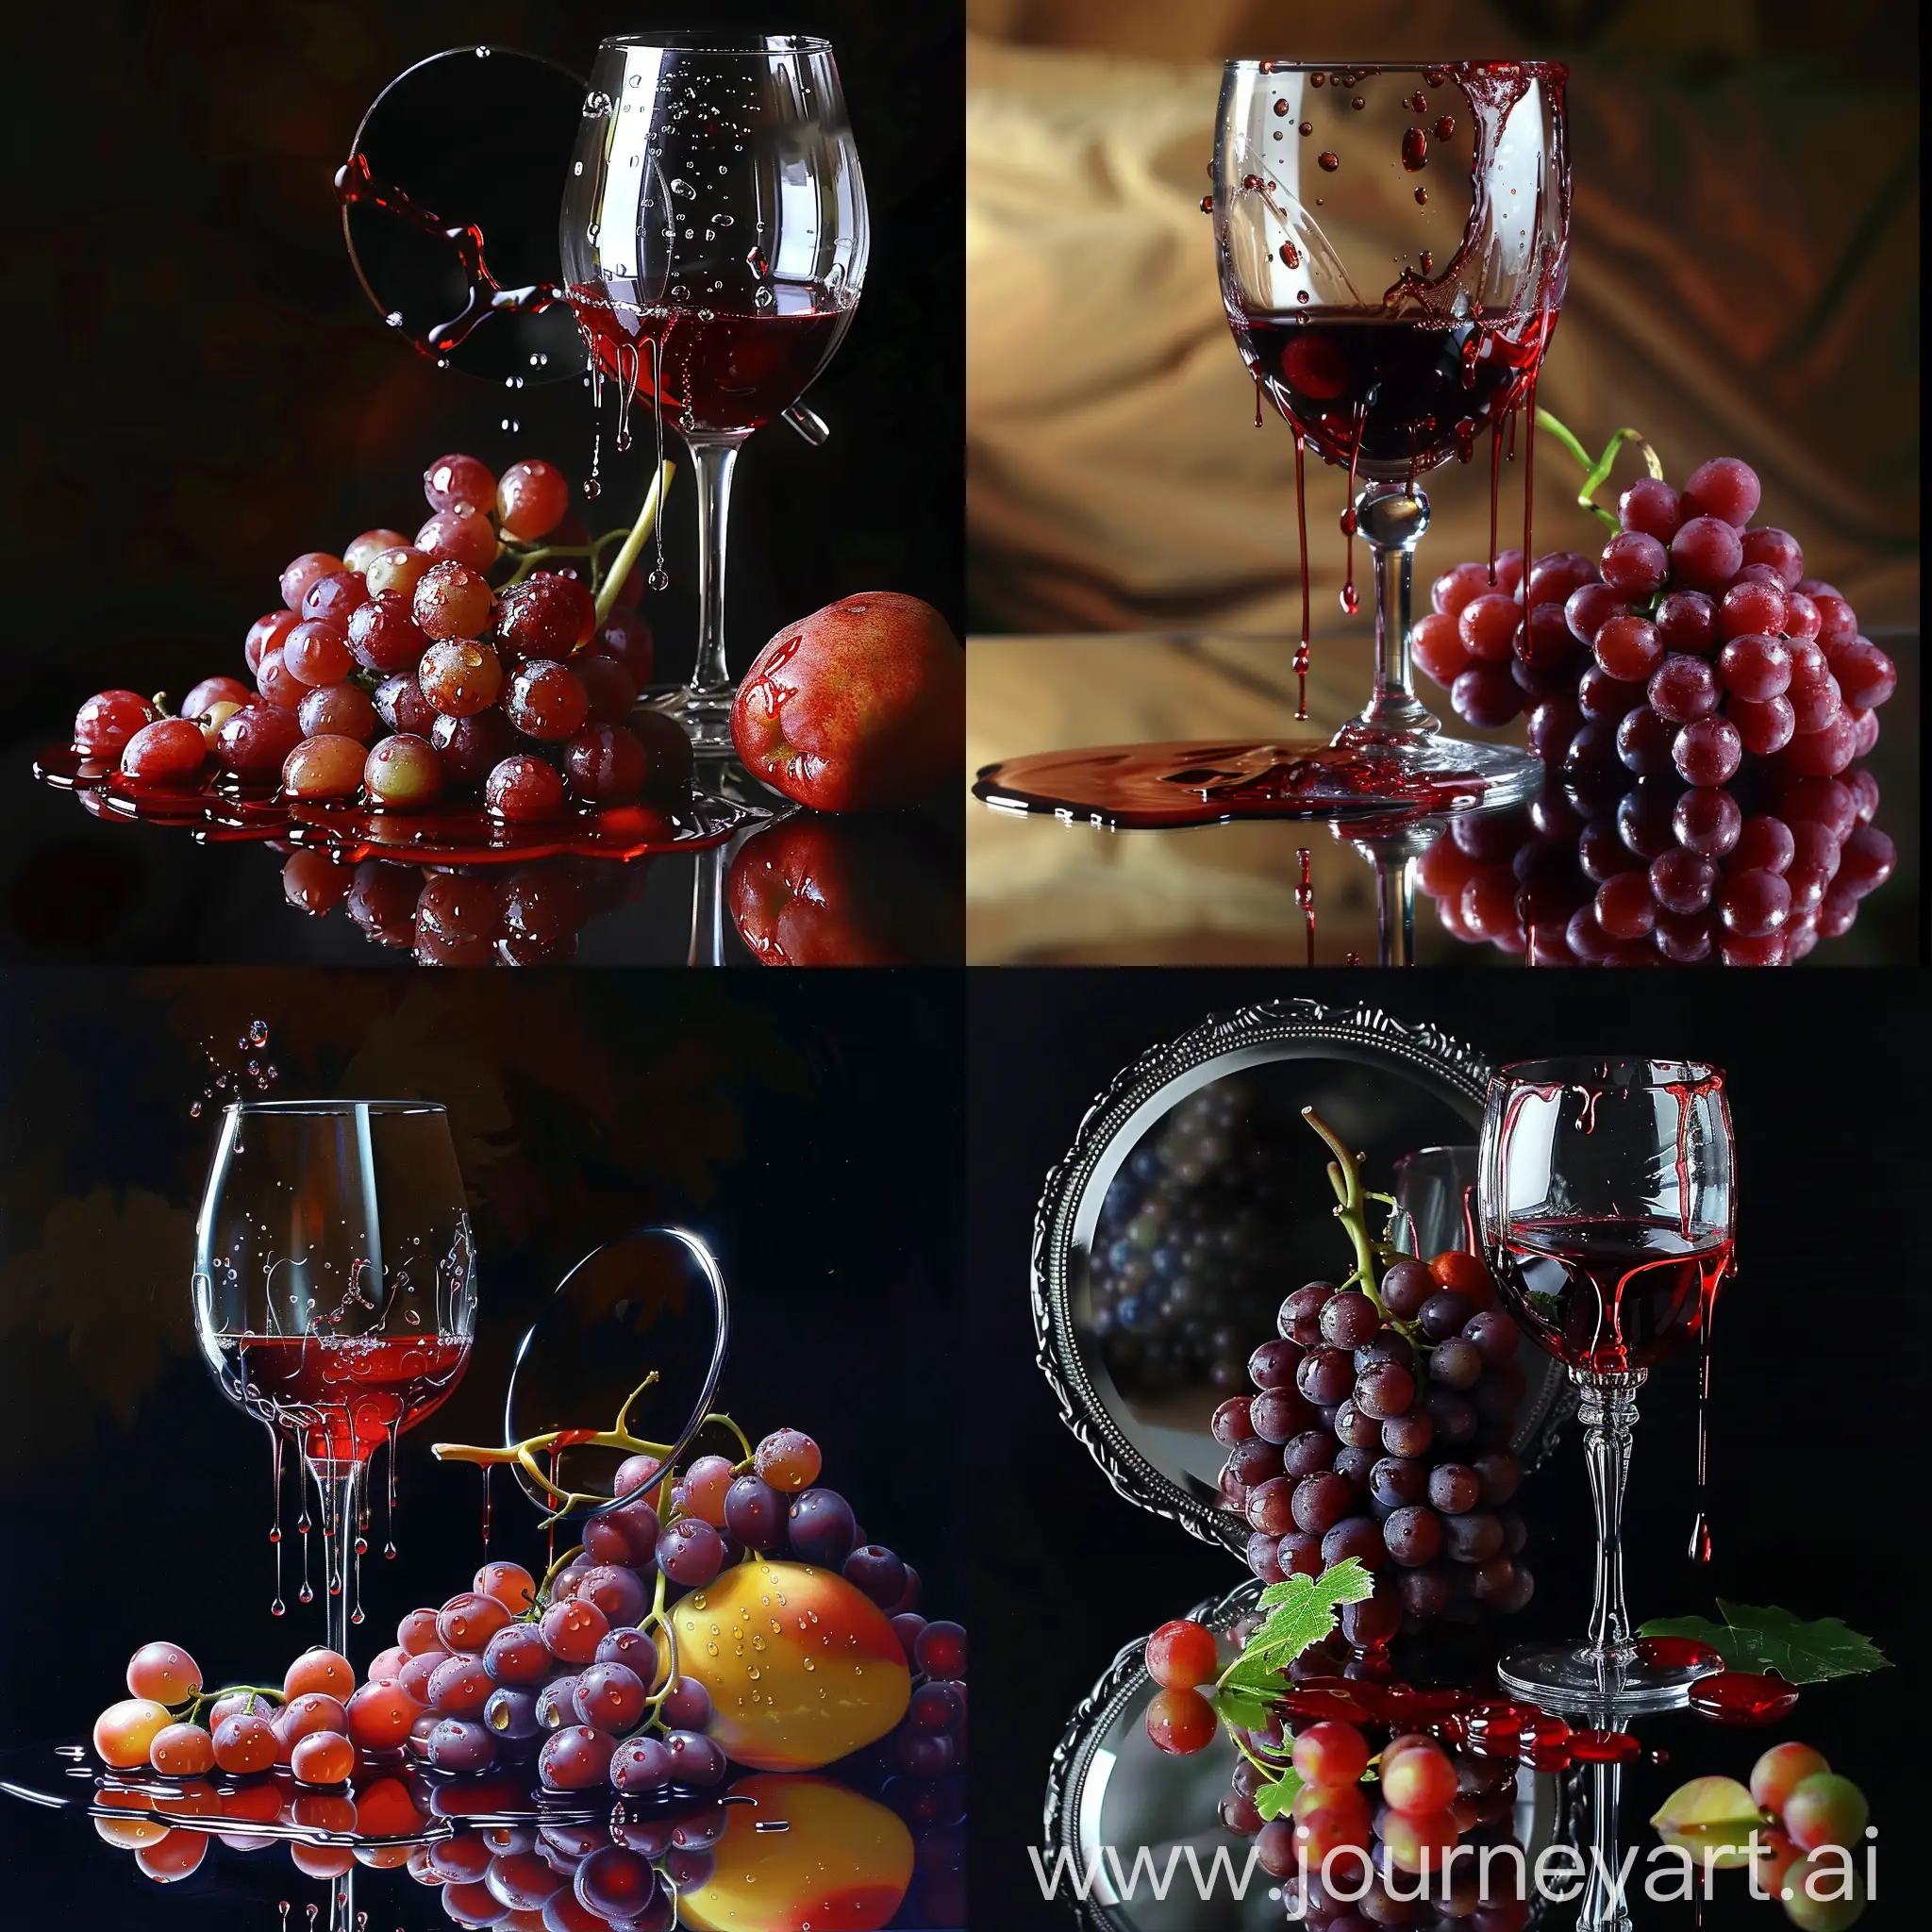 there is a wine glass with a bunch of grapes, red wine, spilling, dripping, fruit juice dripping, beautiful photo, mirror droplet dripping!, Albert Watson photography, surreal glass goblets, photographic hyperrealism, fruit dripping juice, goblet of wine, incredible composition, by Bernat Sanjuan, incredible